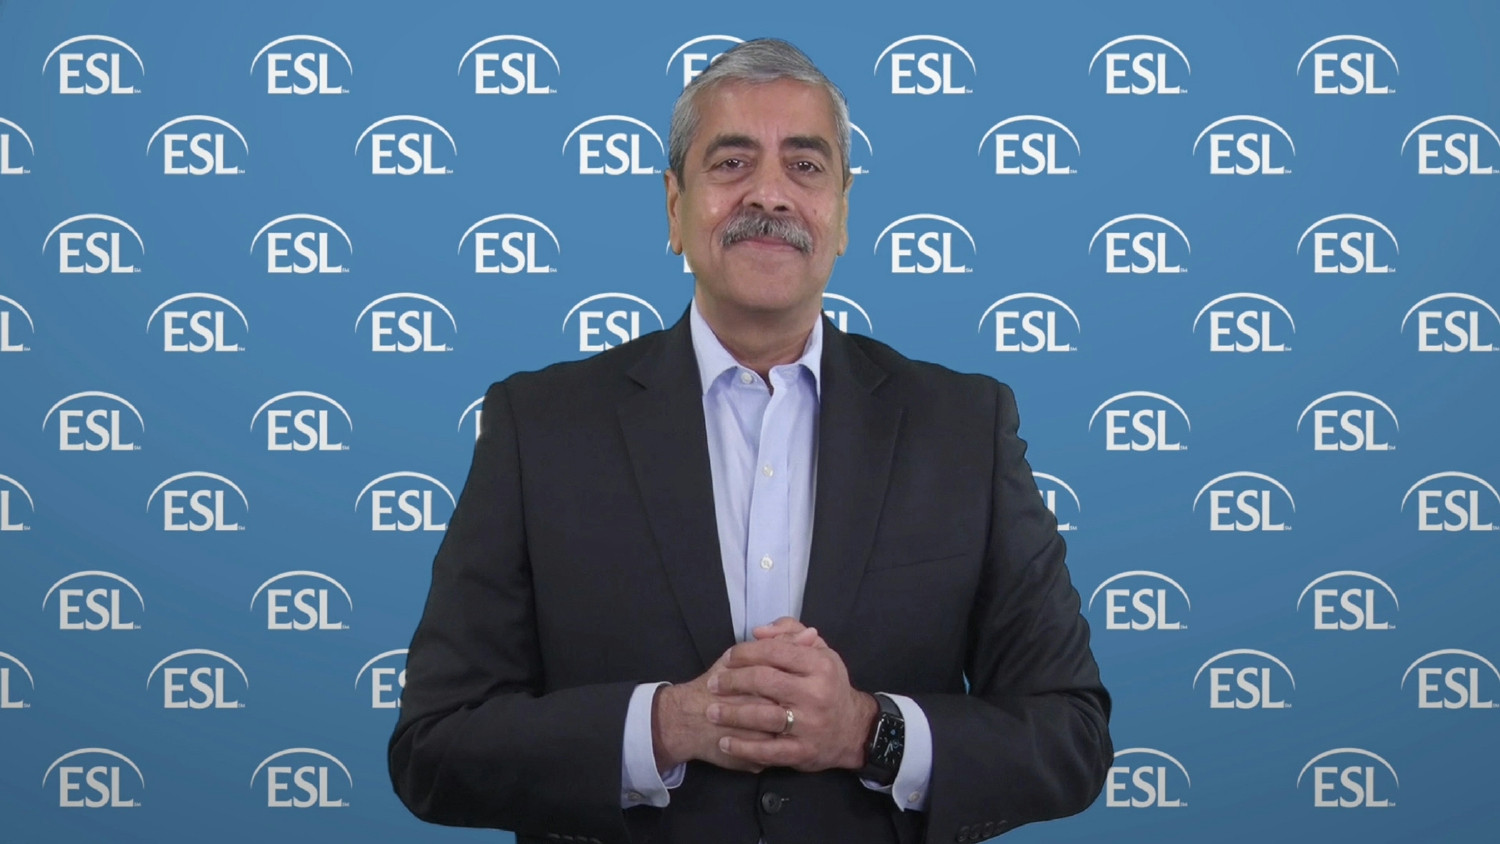 President & CEO Faheem Masood communicates directly to ESL employees through monthly video updates. 